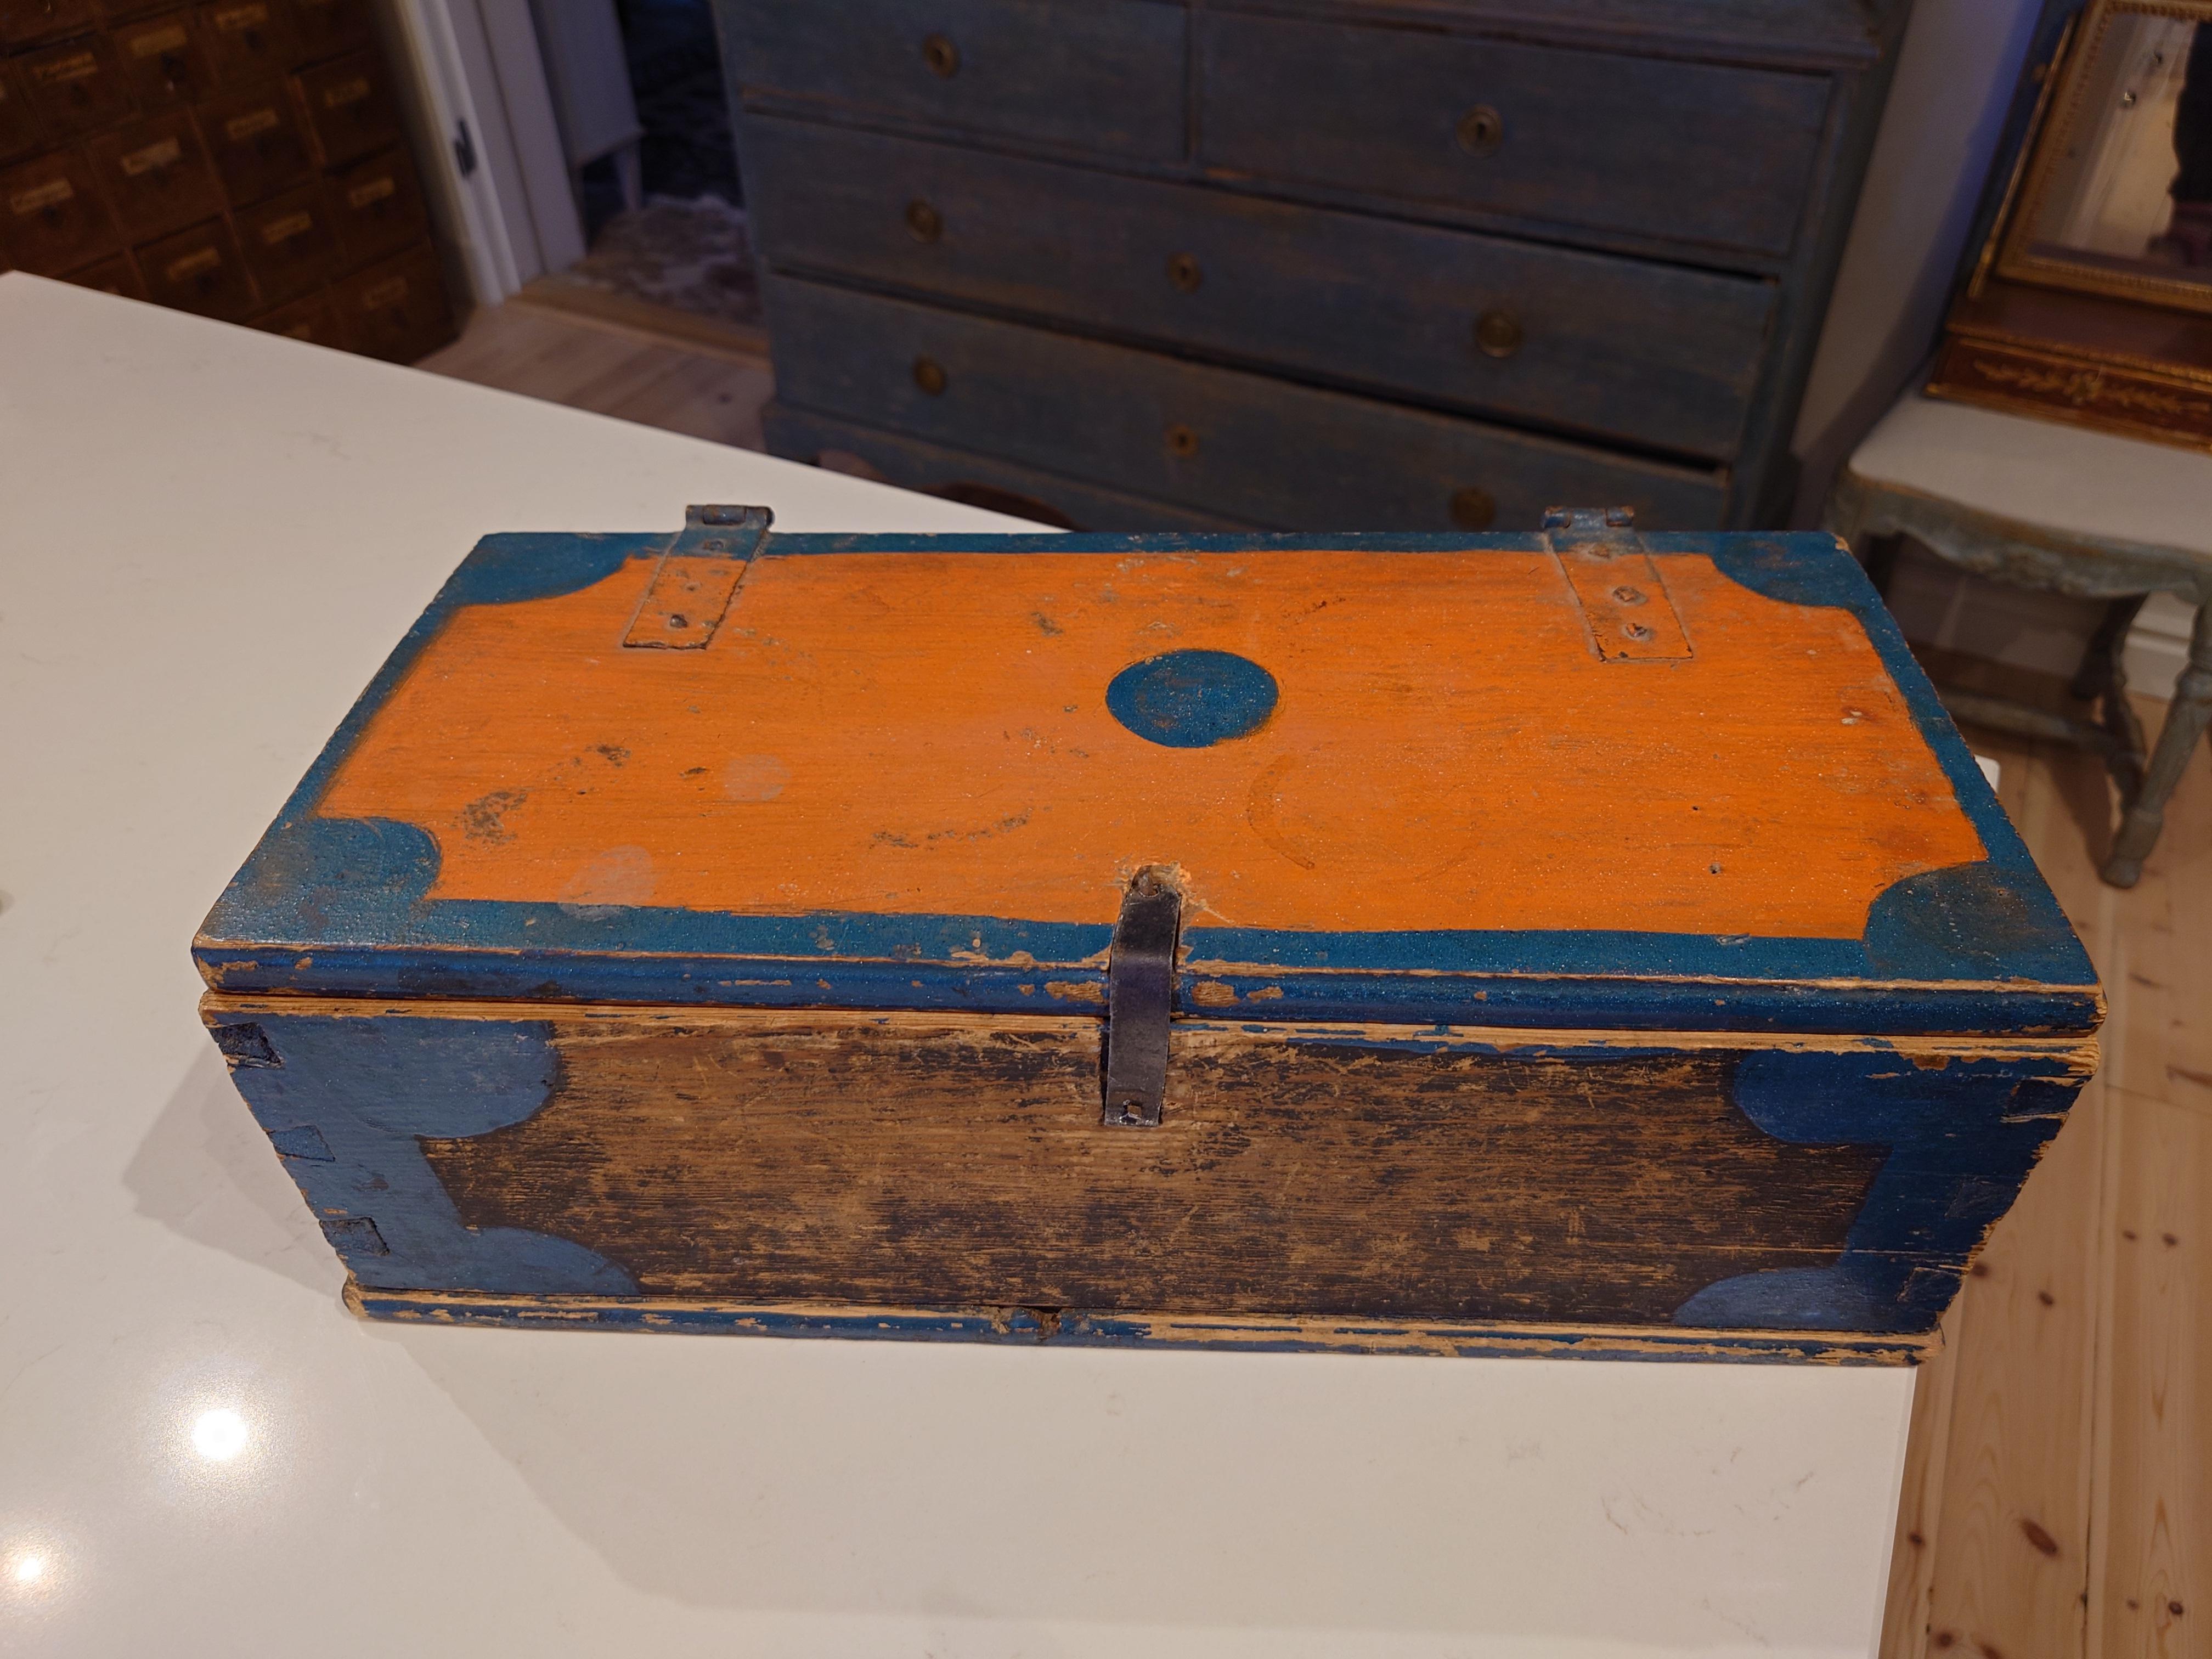 19th century Swedish folk art wooden box from Boden, Norbotten Northern Sweden. 
Beautiful colorful color.
The wooden box has untouched original color. 
The box is stable in construction. 
Nice storage inside.
So nice interior detail.
Made in